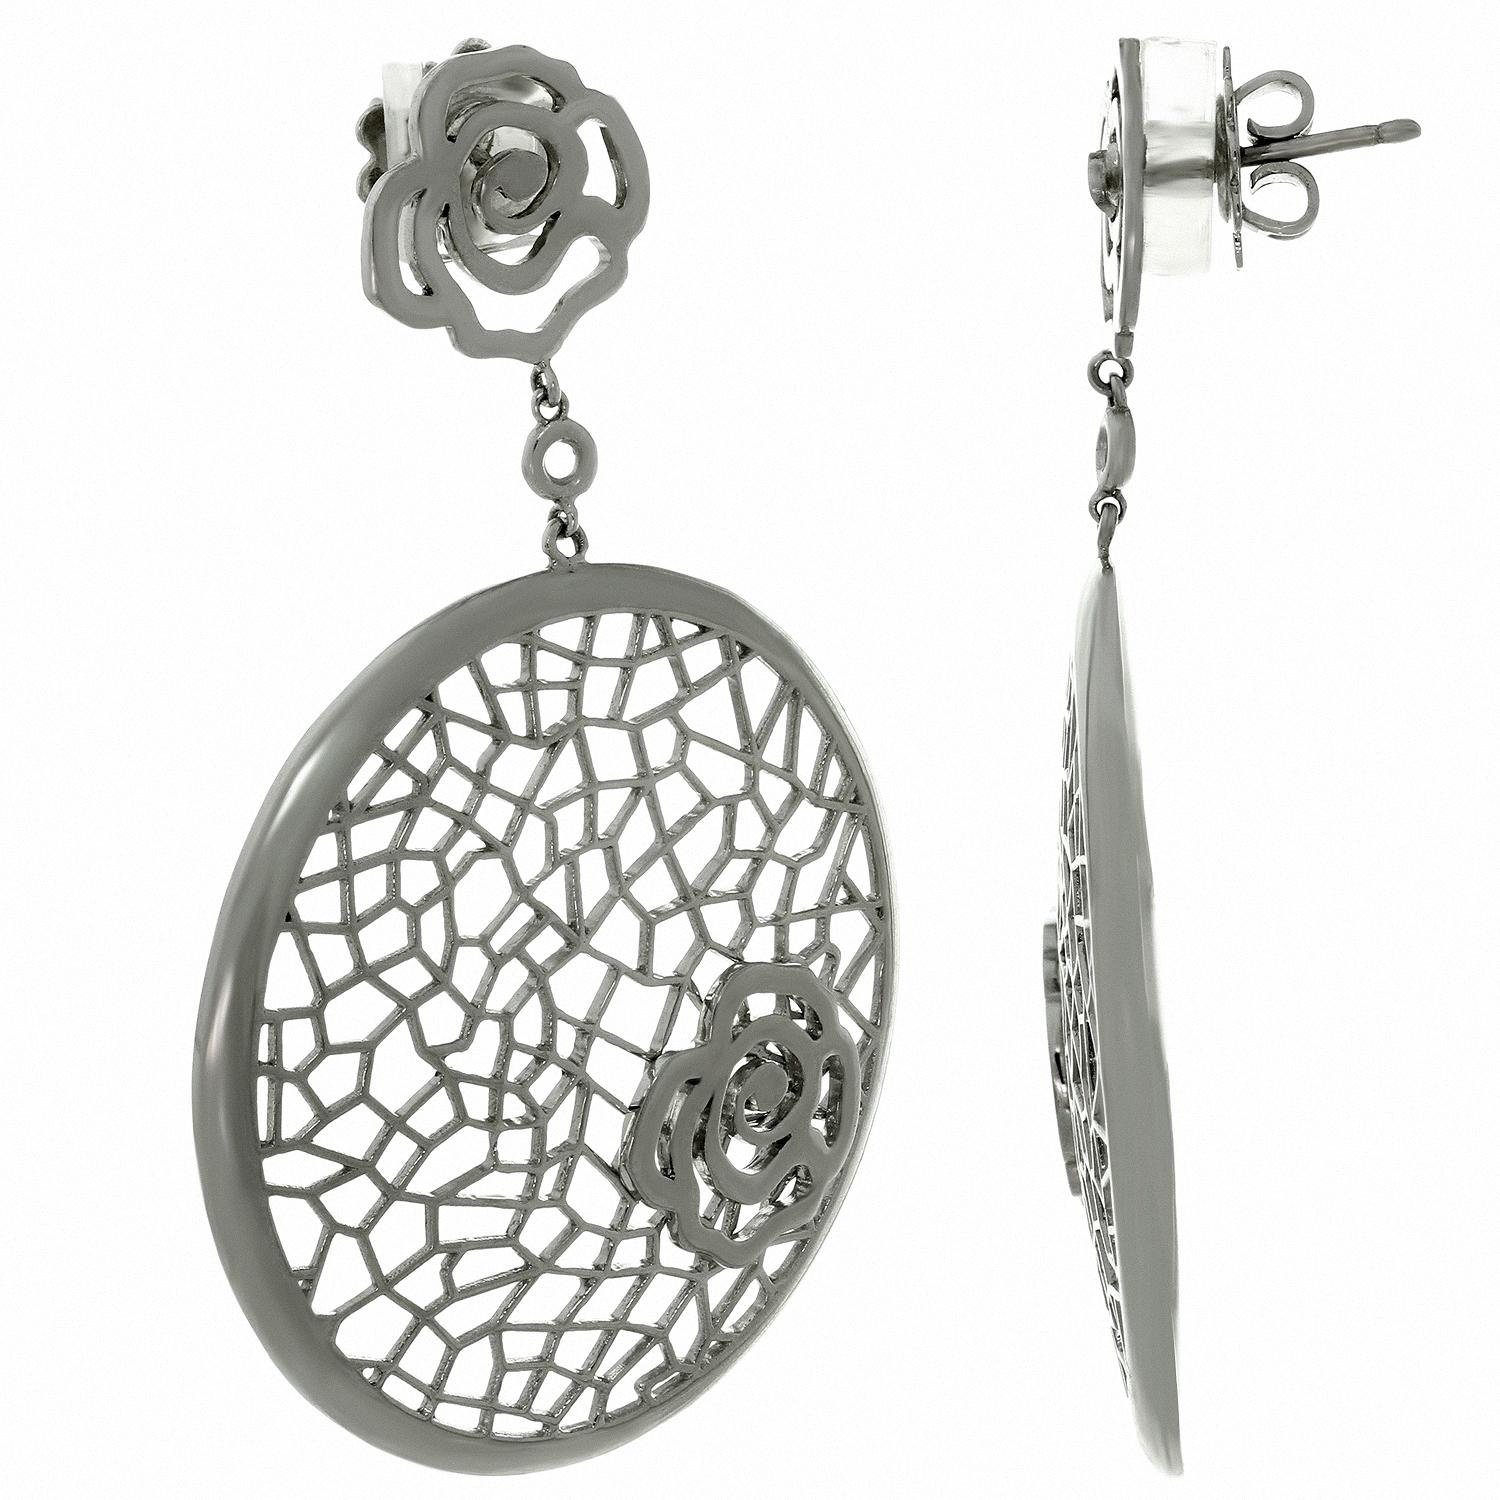 These elegant chic Bucherer drop earrings feature a floral openwork design crafted in 18k white gold. Made in France circa 2010s. Measurements: 1.57